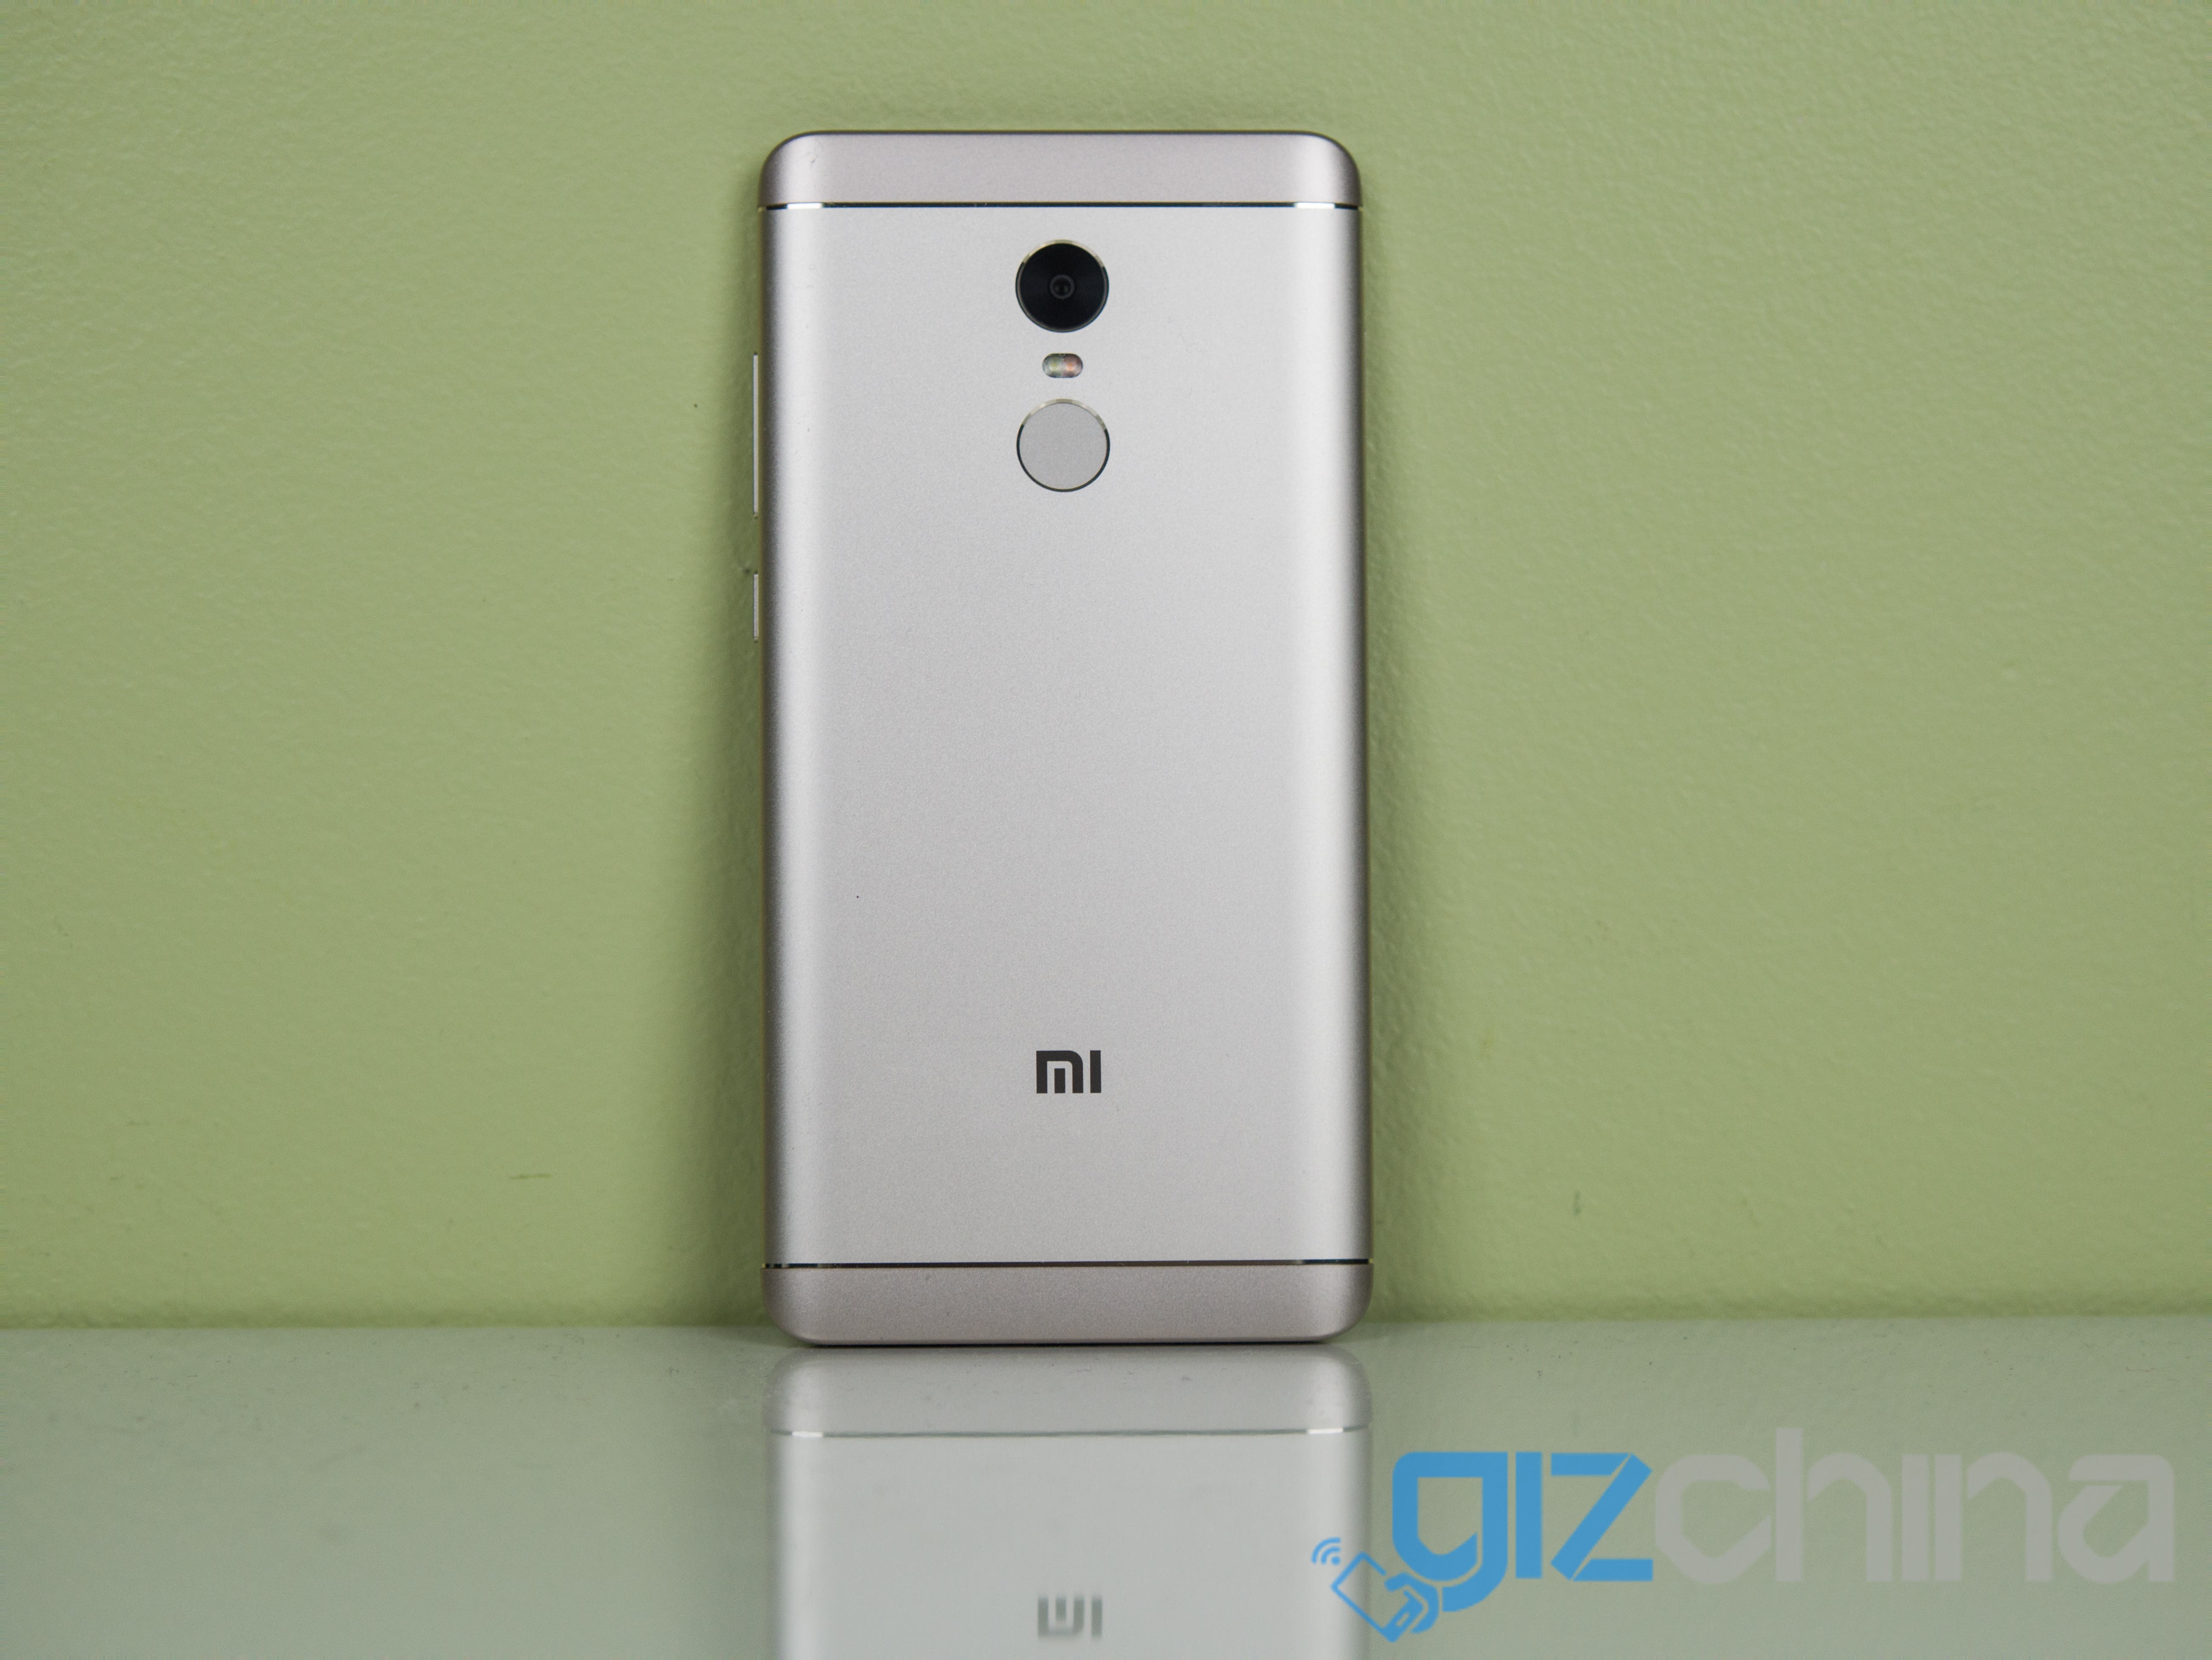  Xiaomi Redmi Note 4X Unboxing Hands On First Impressions 